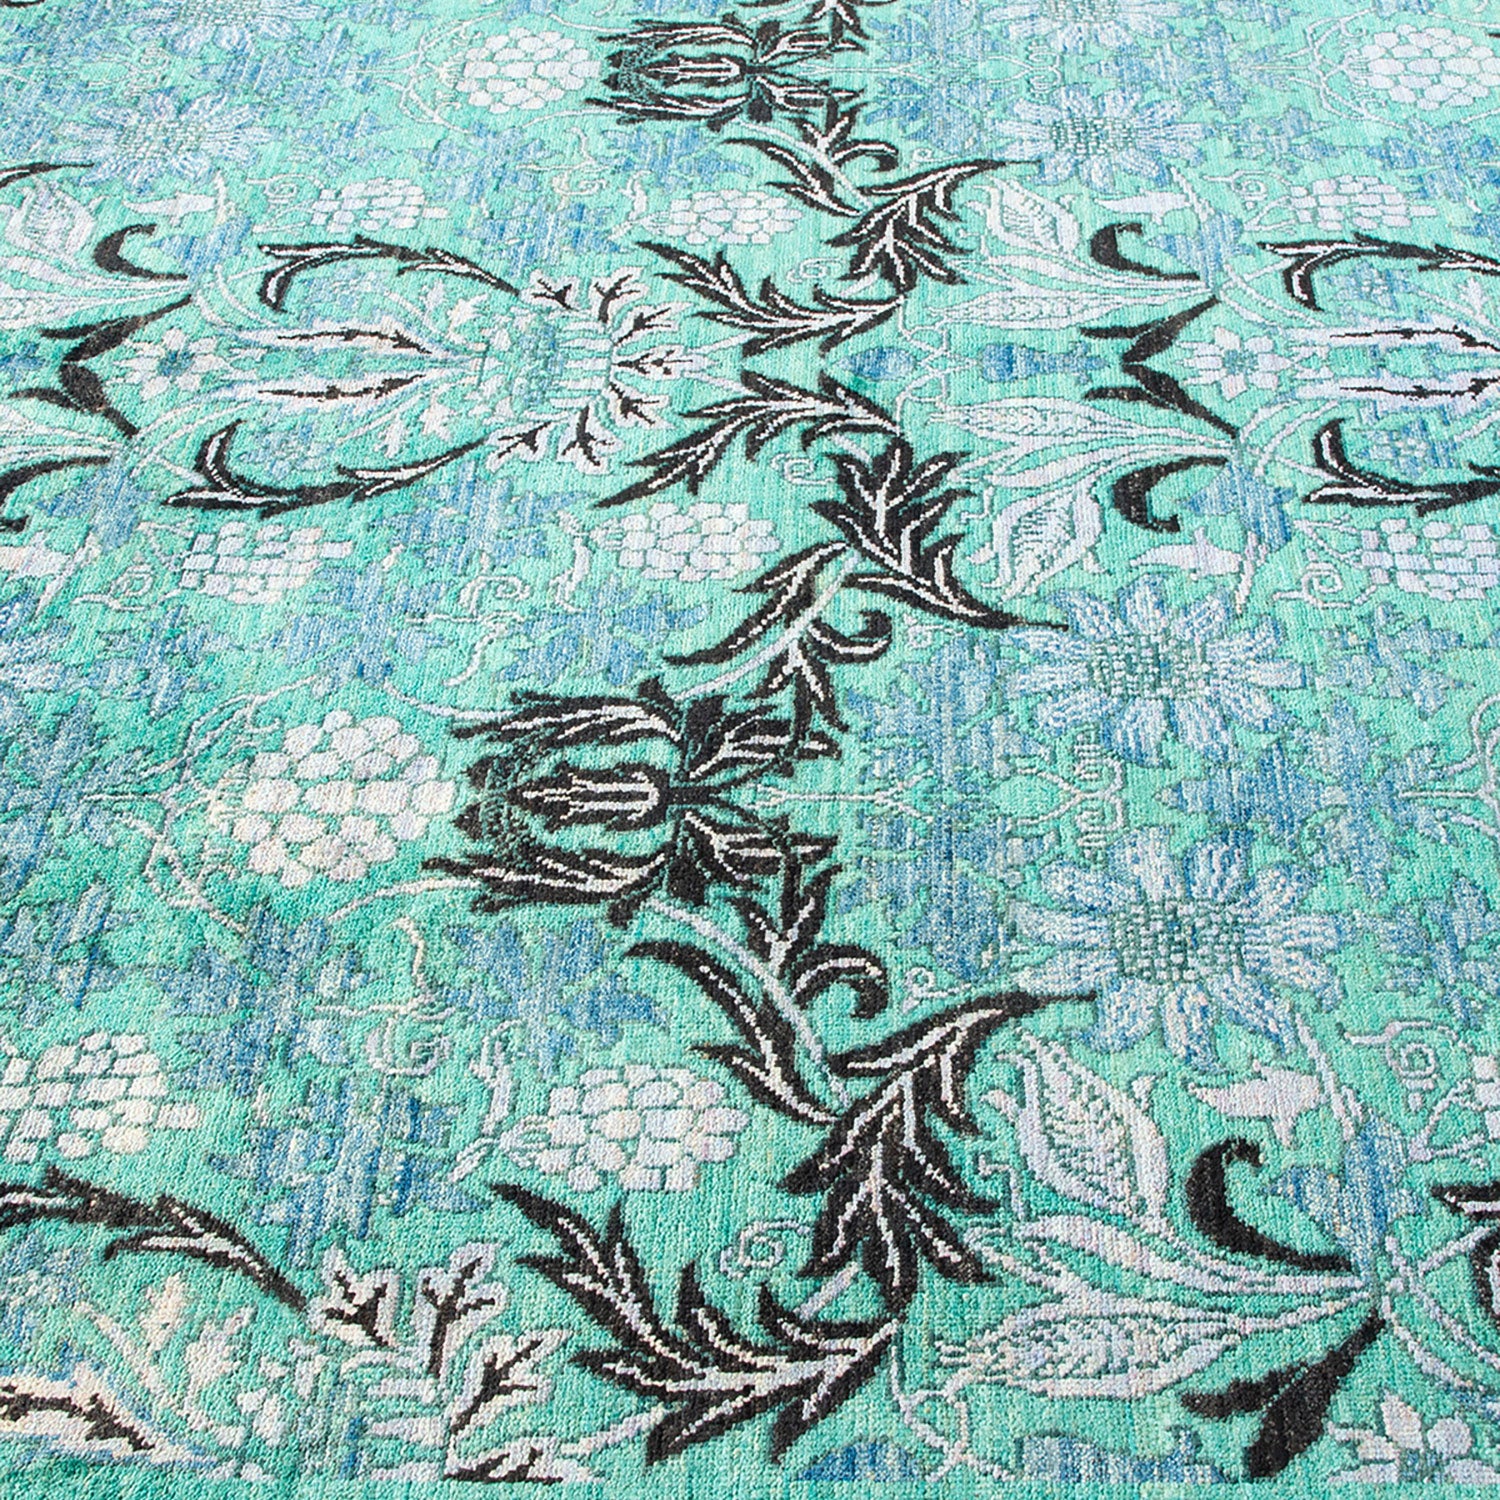 Arts & Crafts, One-of-a-Kind Hand-Knotted Area Rug  - Green, 6' 2" x 11' 8" Default Title